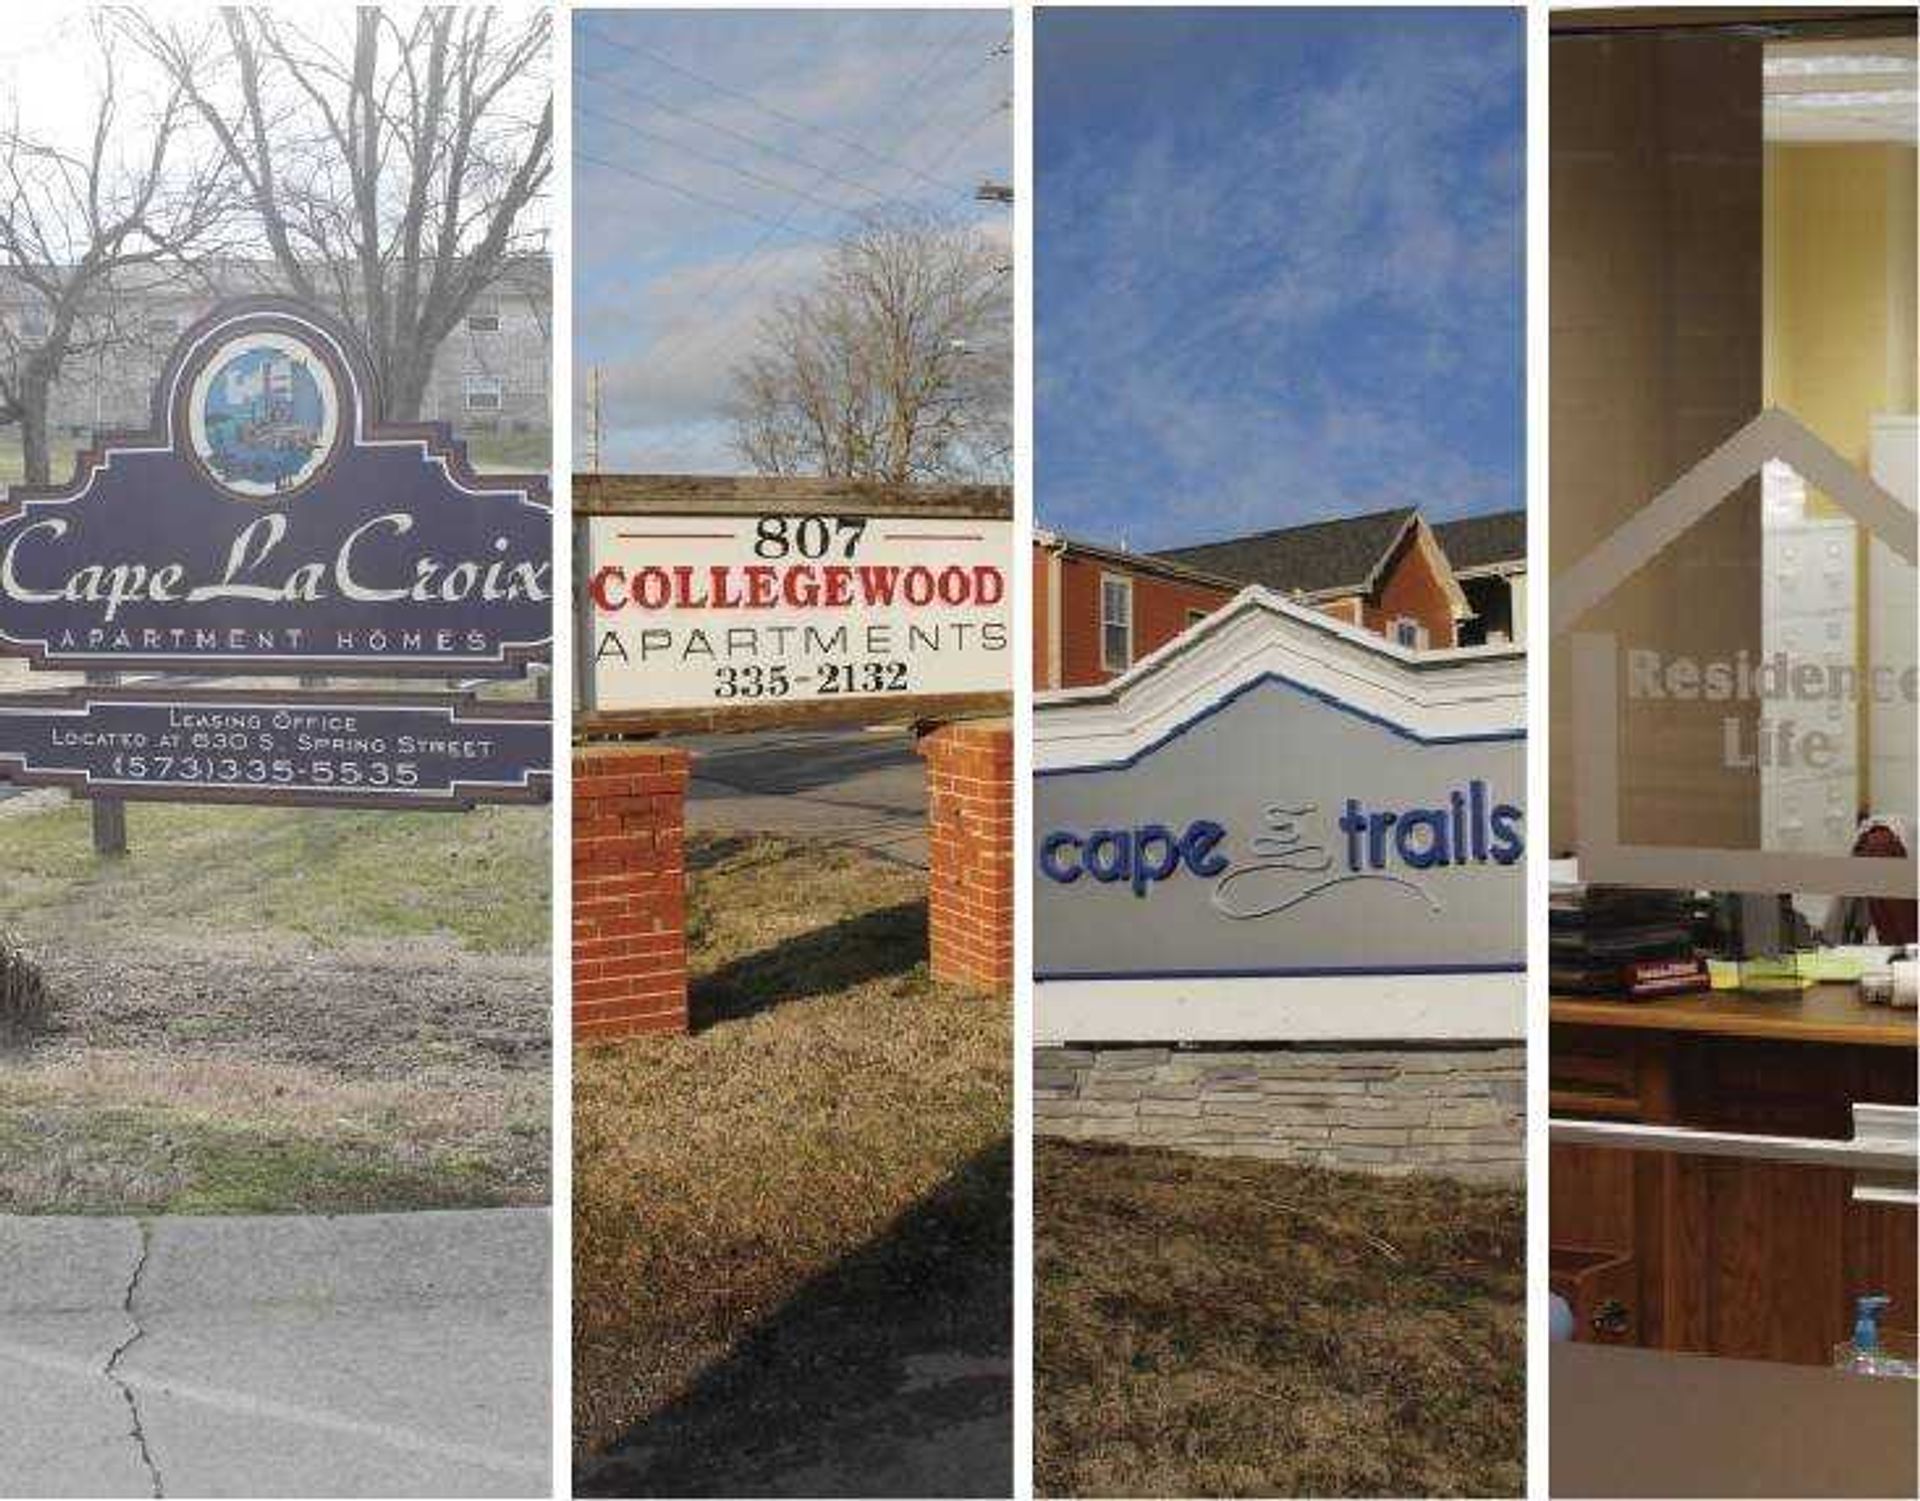 A few of the popular housing options in Cape Girardeau. Photos by Drew Yount.